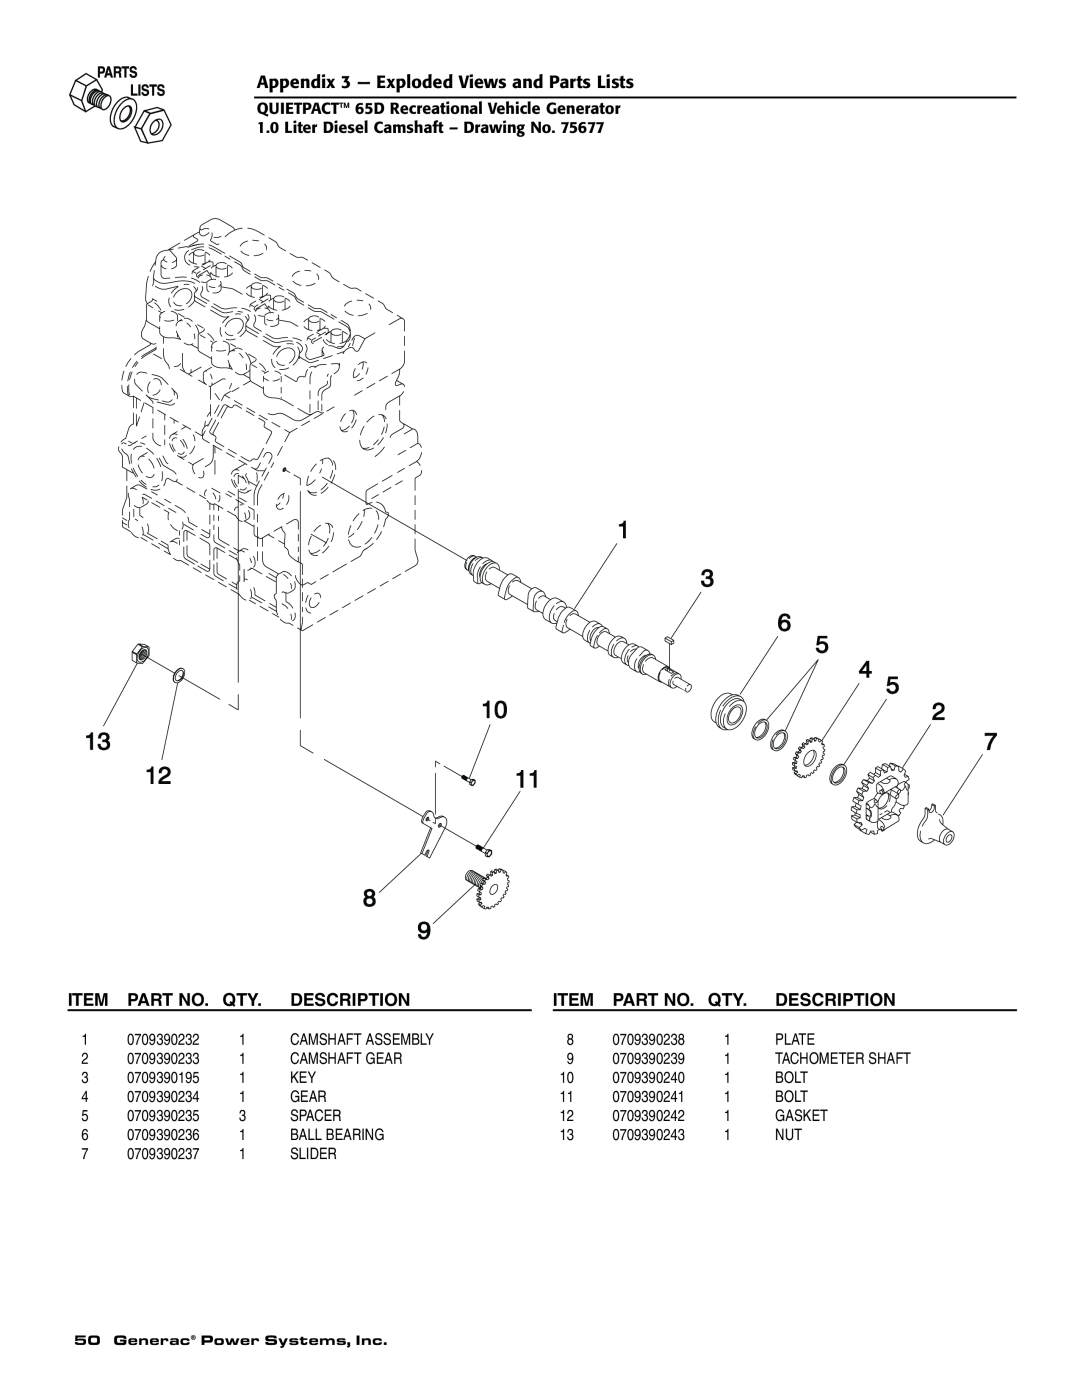 Generac 004614-1 owner manual Appendix 3 - Exploded Views and Parts Lists, Description, Generac Power Systems, Inc 